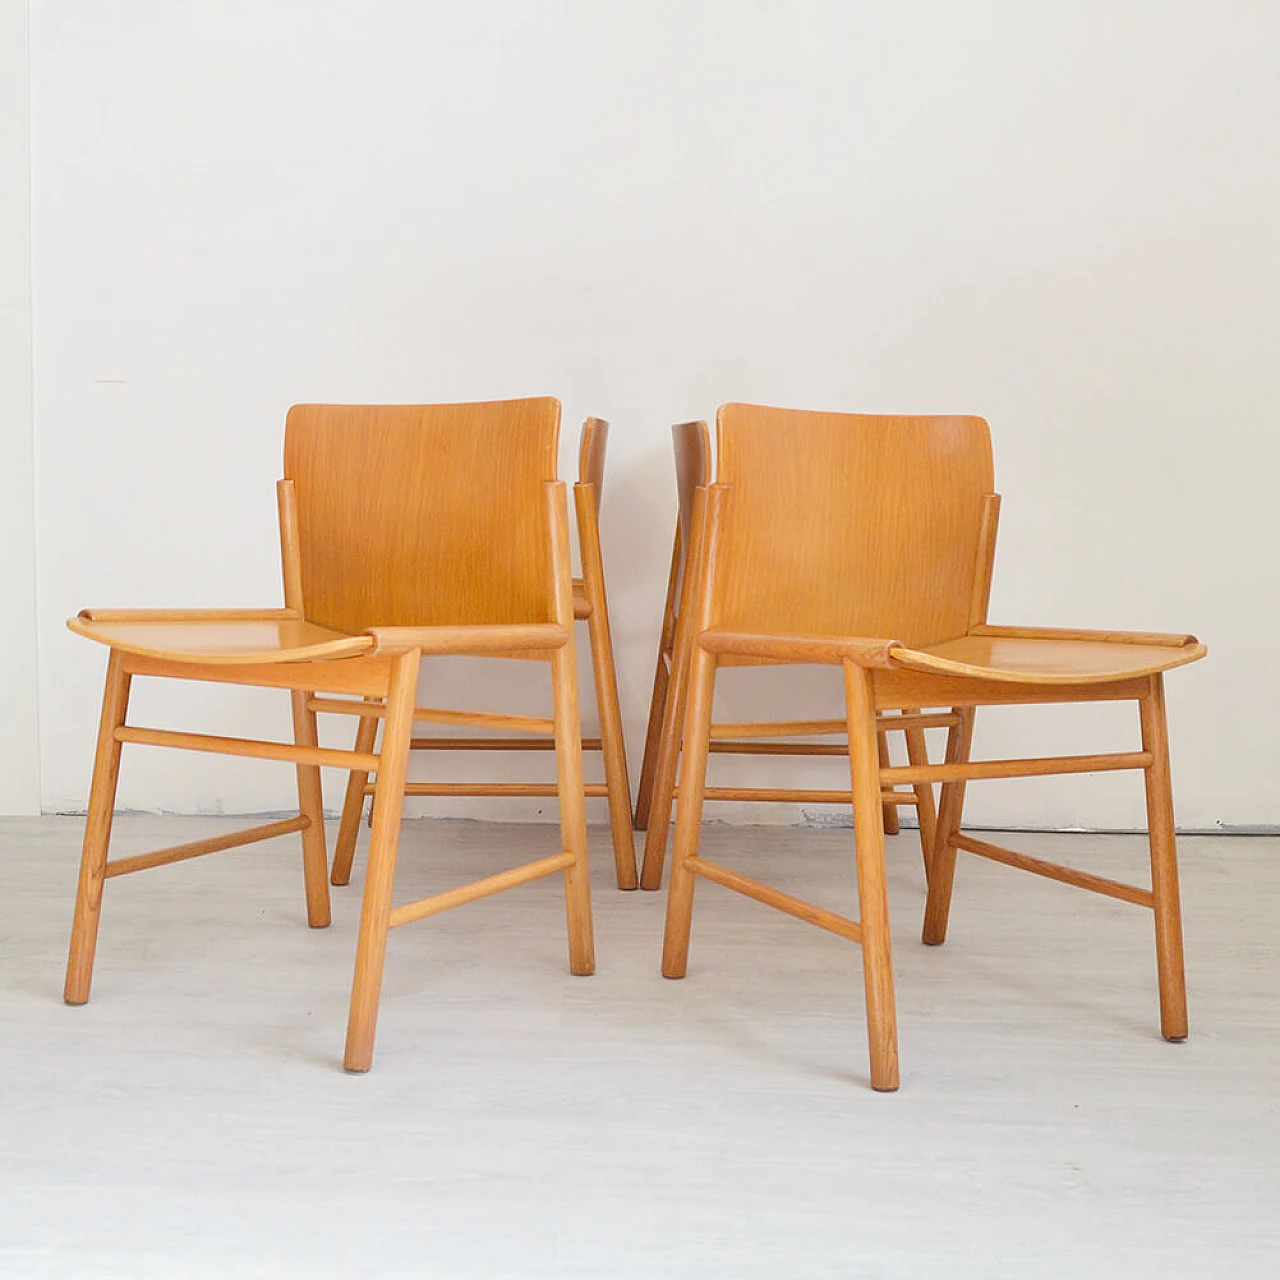 4 Chairs in oak and bent plywood 2